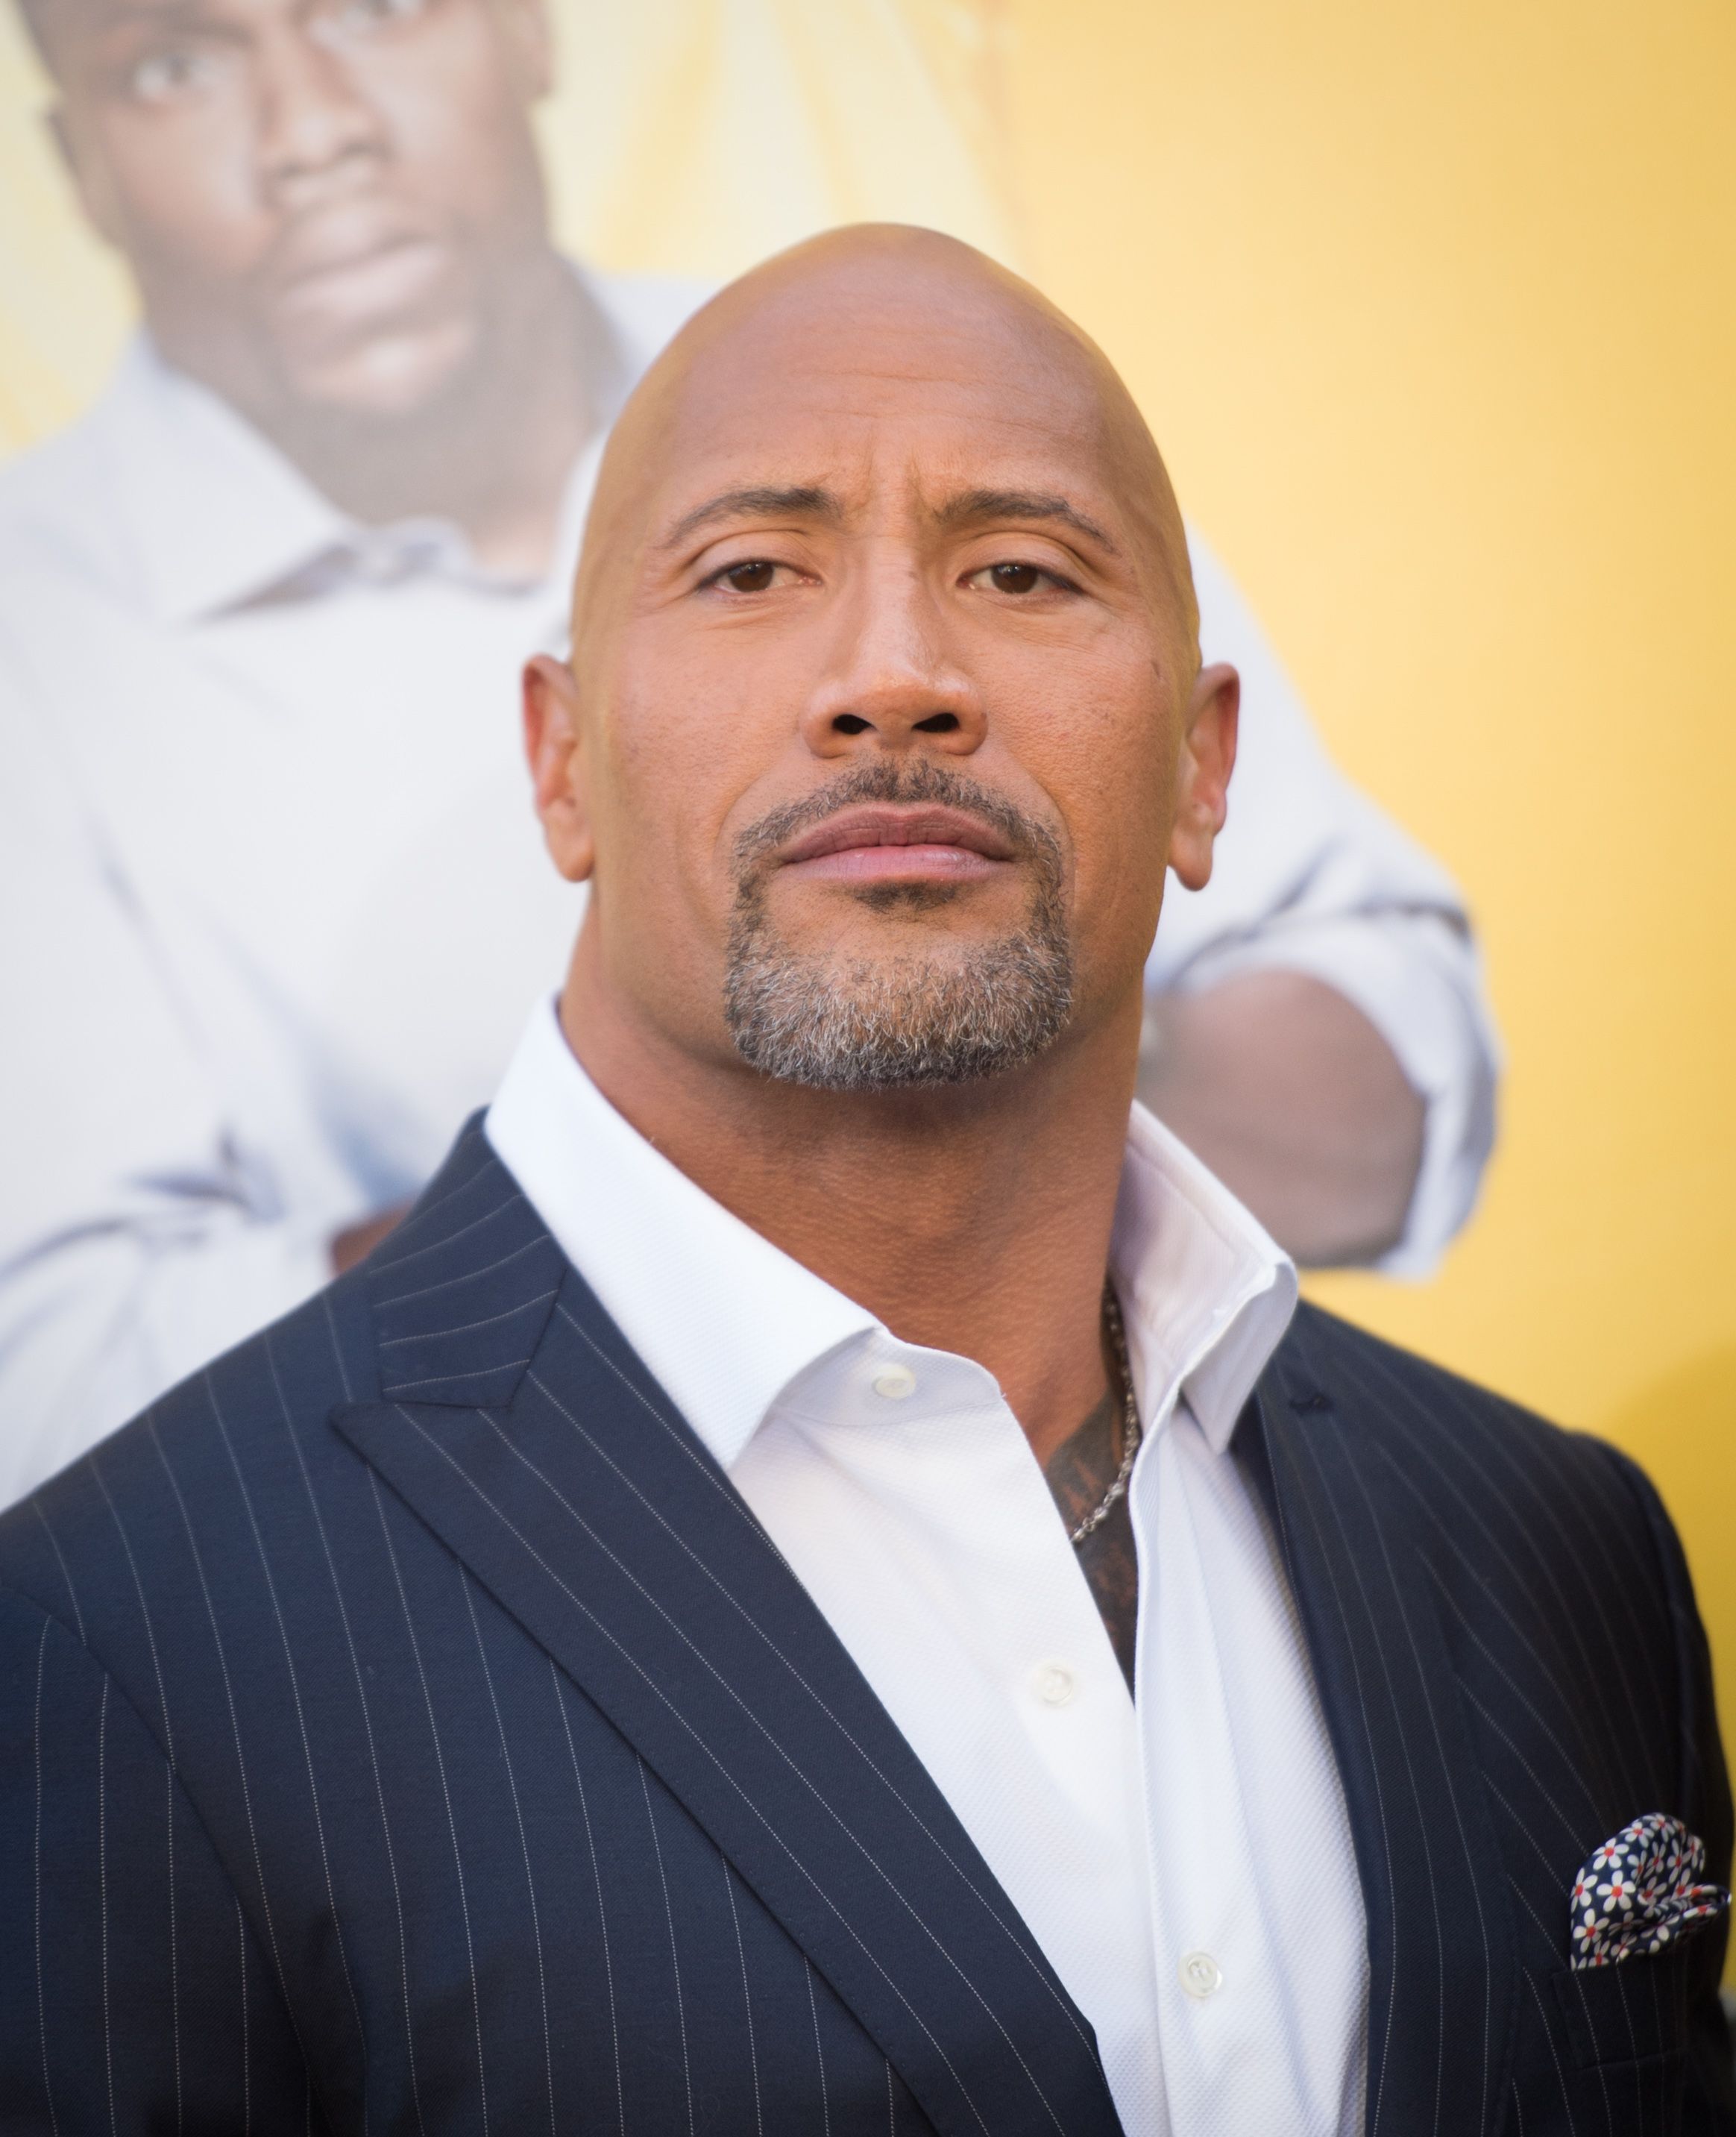 Actor Dwayne Johnson at the premiere of Warner Bros. Pictures' "Central Intelligence" at Westwood Village Theatre on June 10, 2016 | Photo: Getty Images